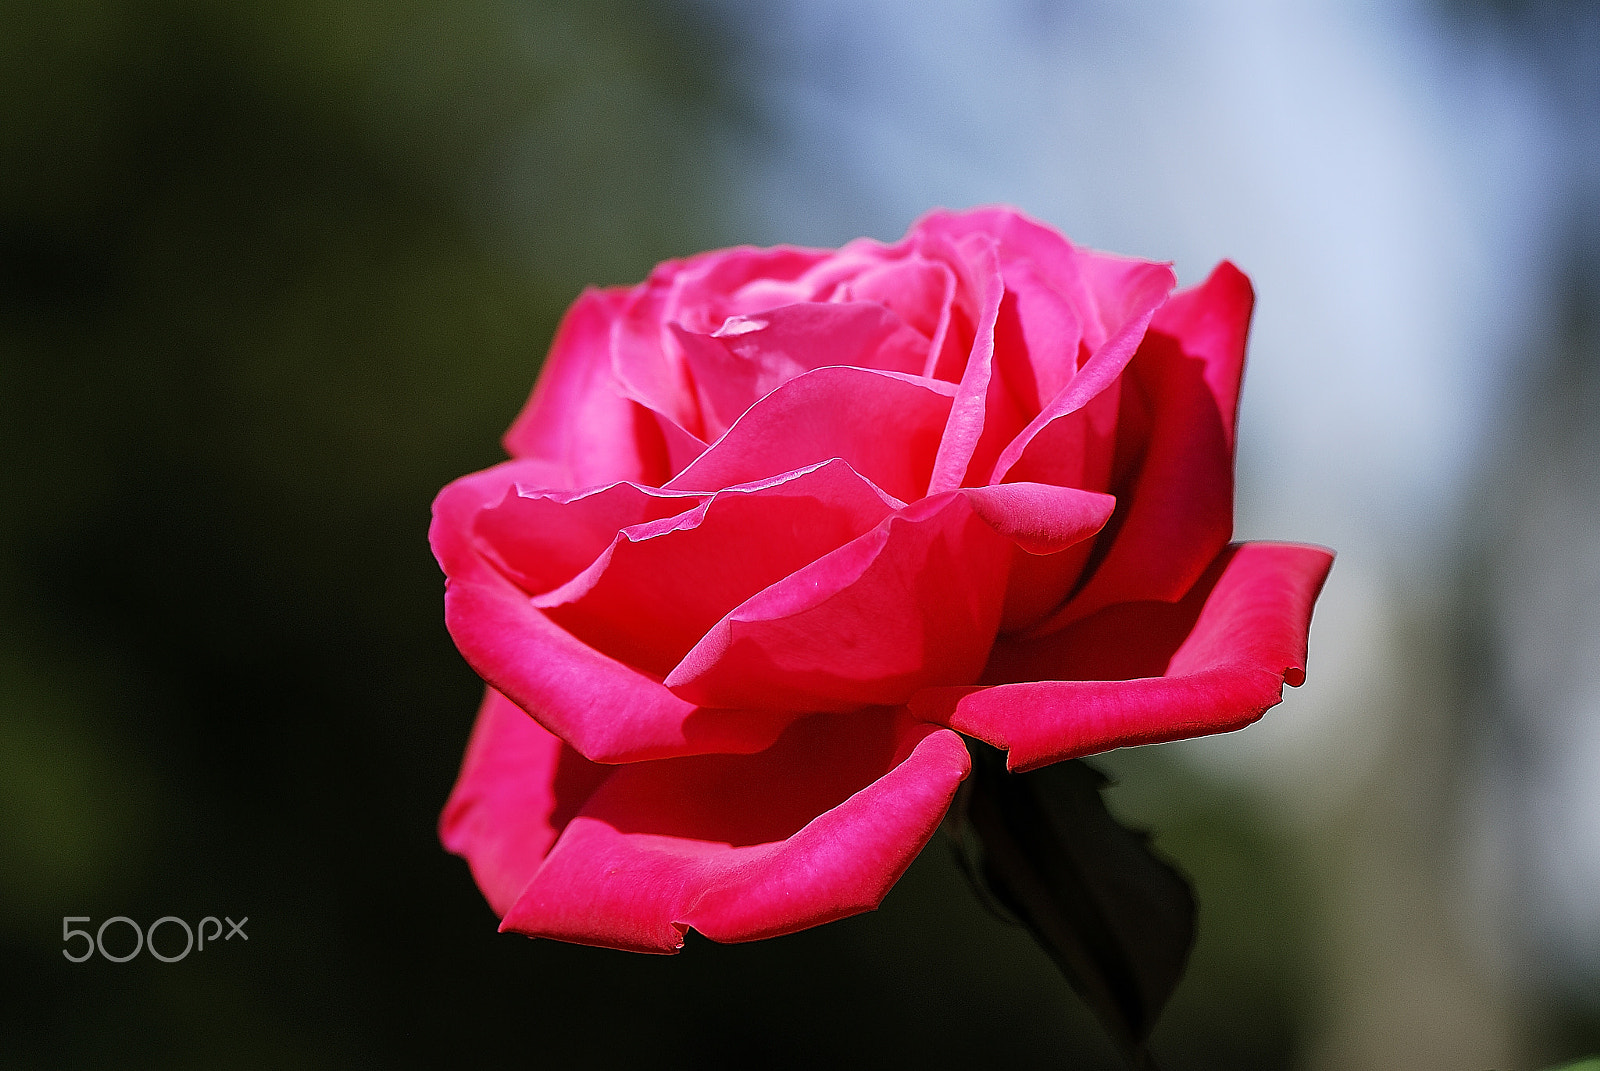 Nikon D200 sample photo. Red rose of pure natural light photography